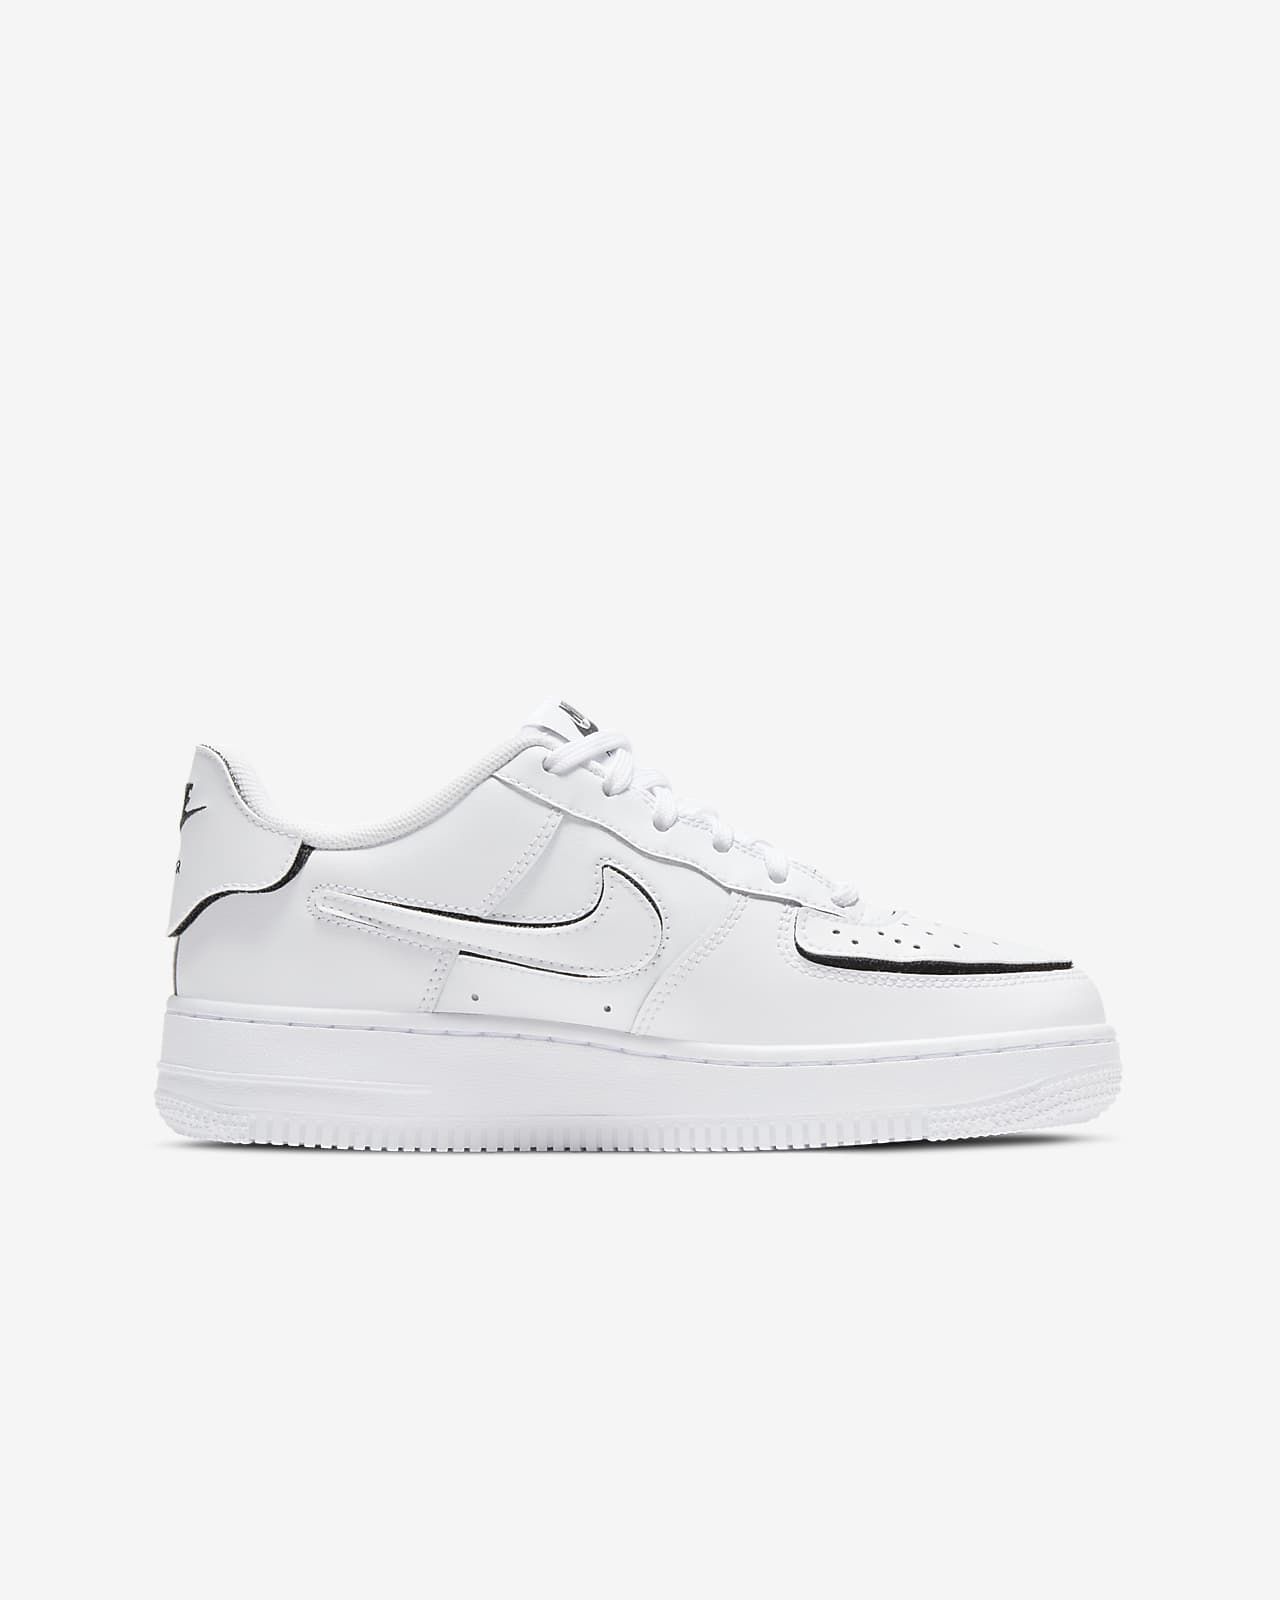 nike air force 1 size 4.5 youth white